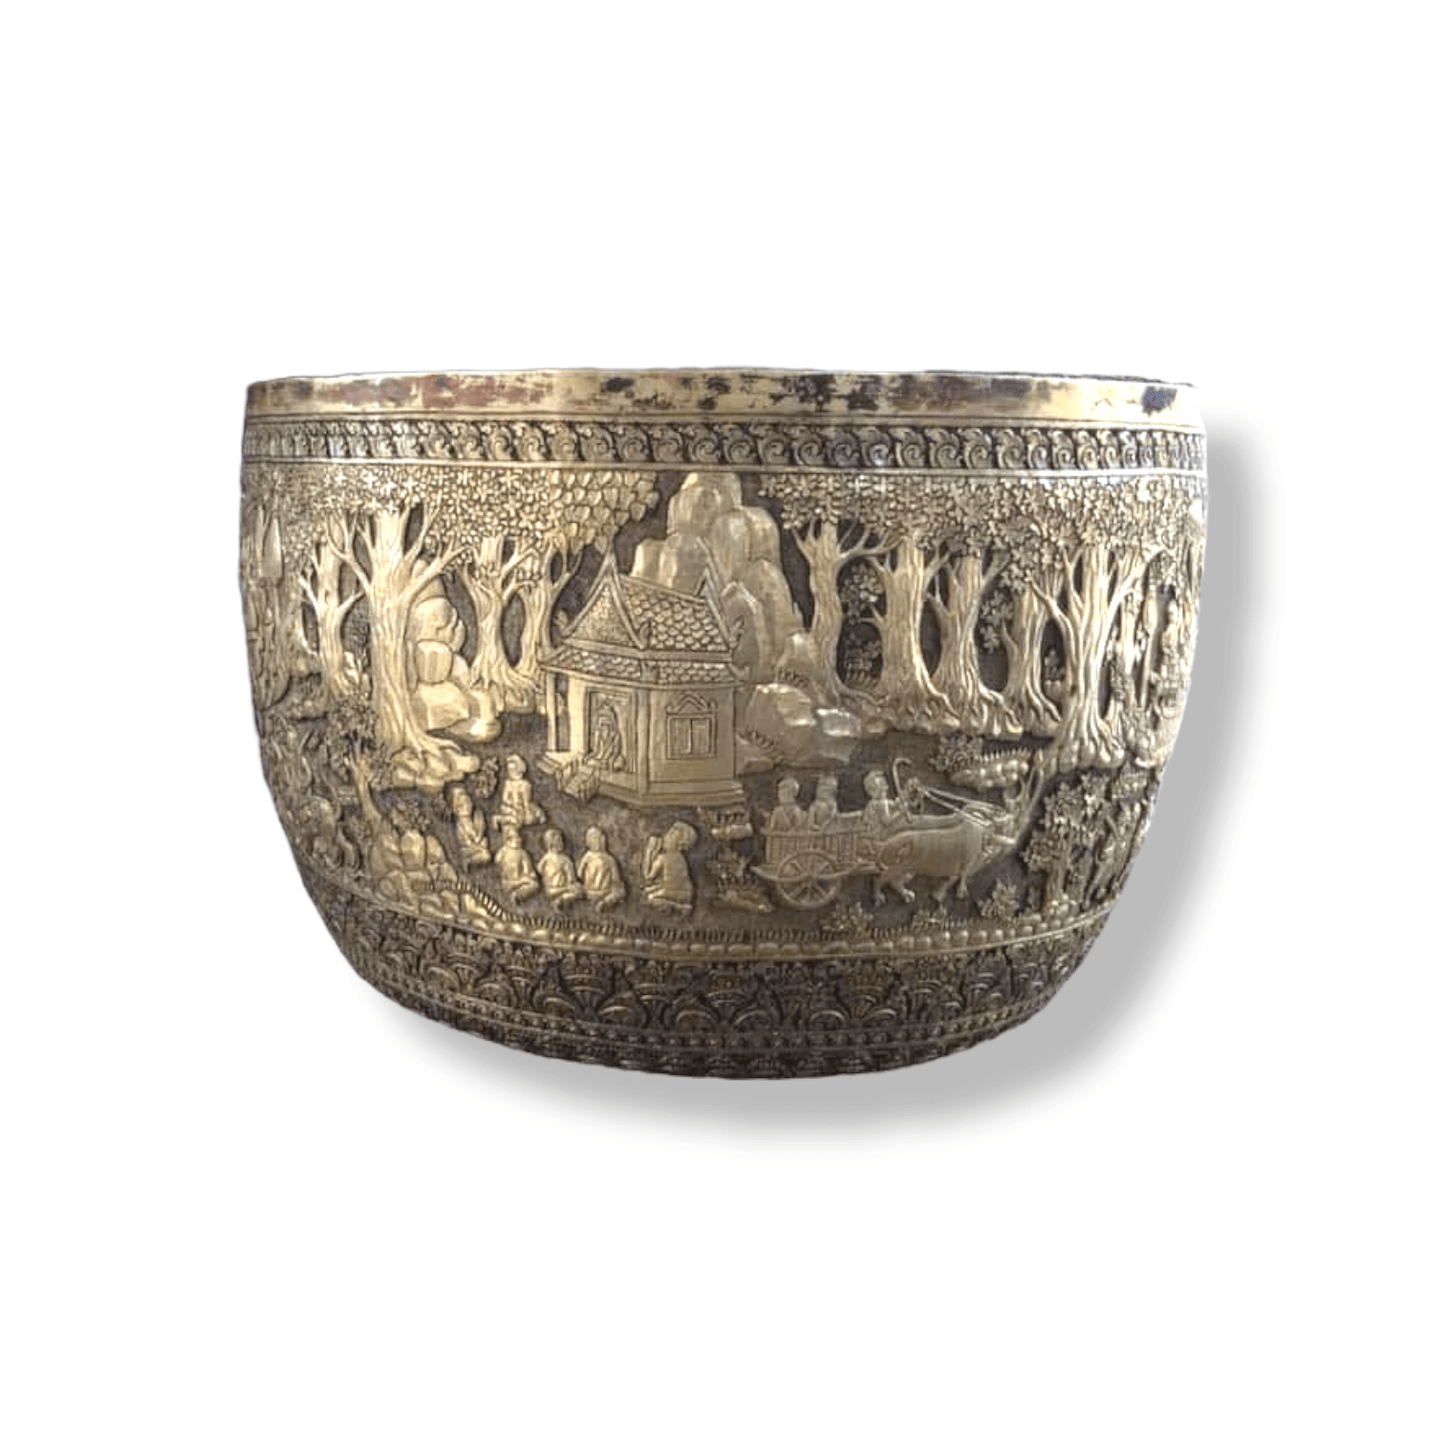 Hand Engraved Solid Brass Mug with Handle - Khmer Rural Hand Engraved Solid Brass Mug with Handle - Warriors and Horse Royal Solid Brass Niello Bowl with Lotus Lid 